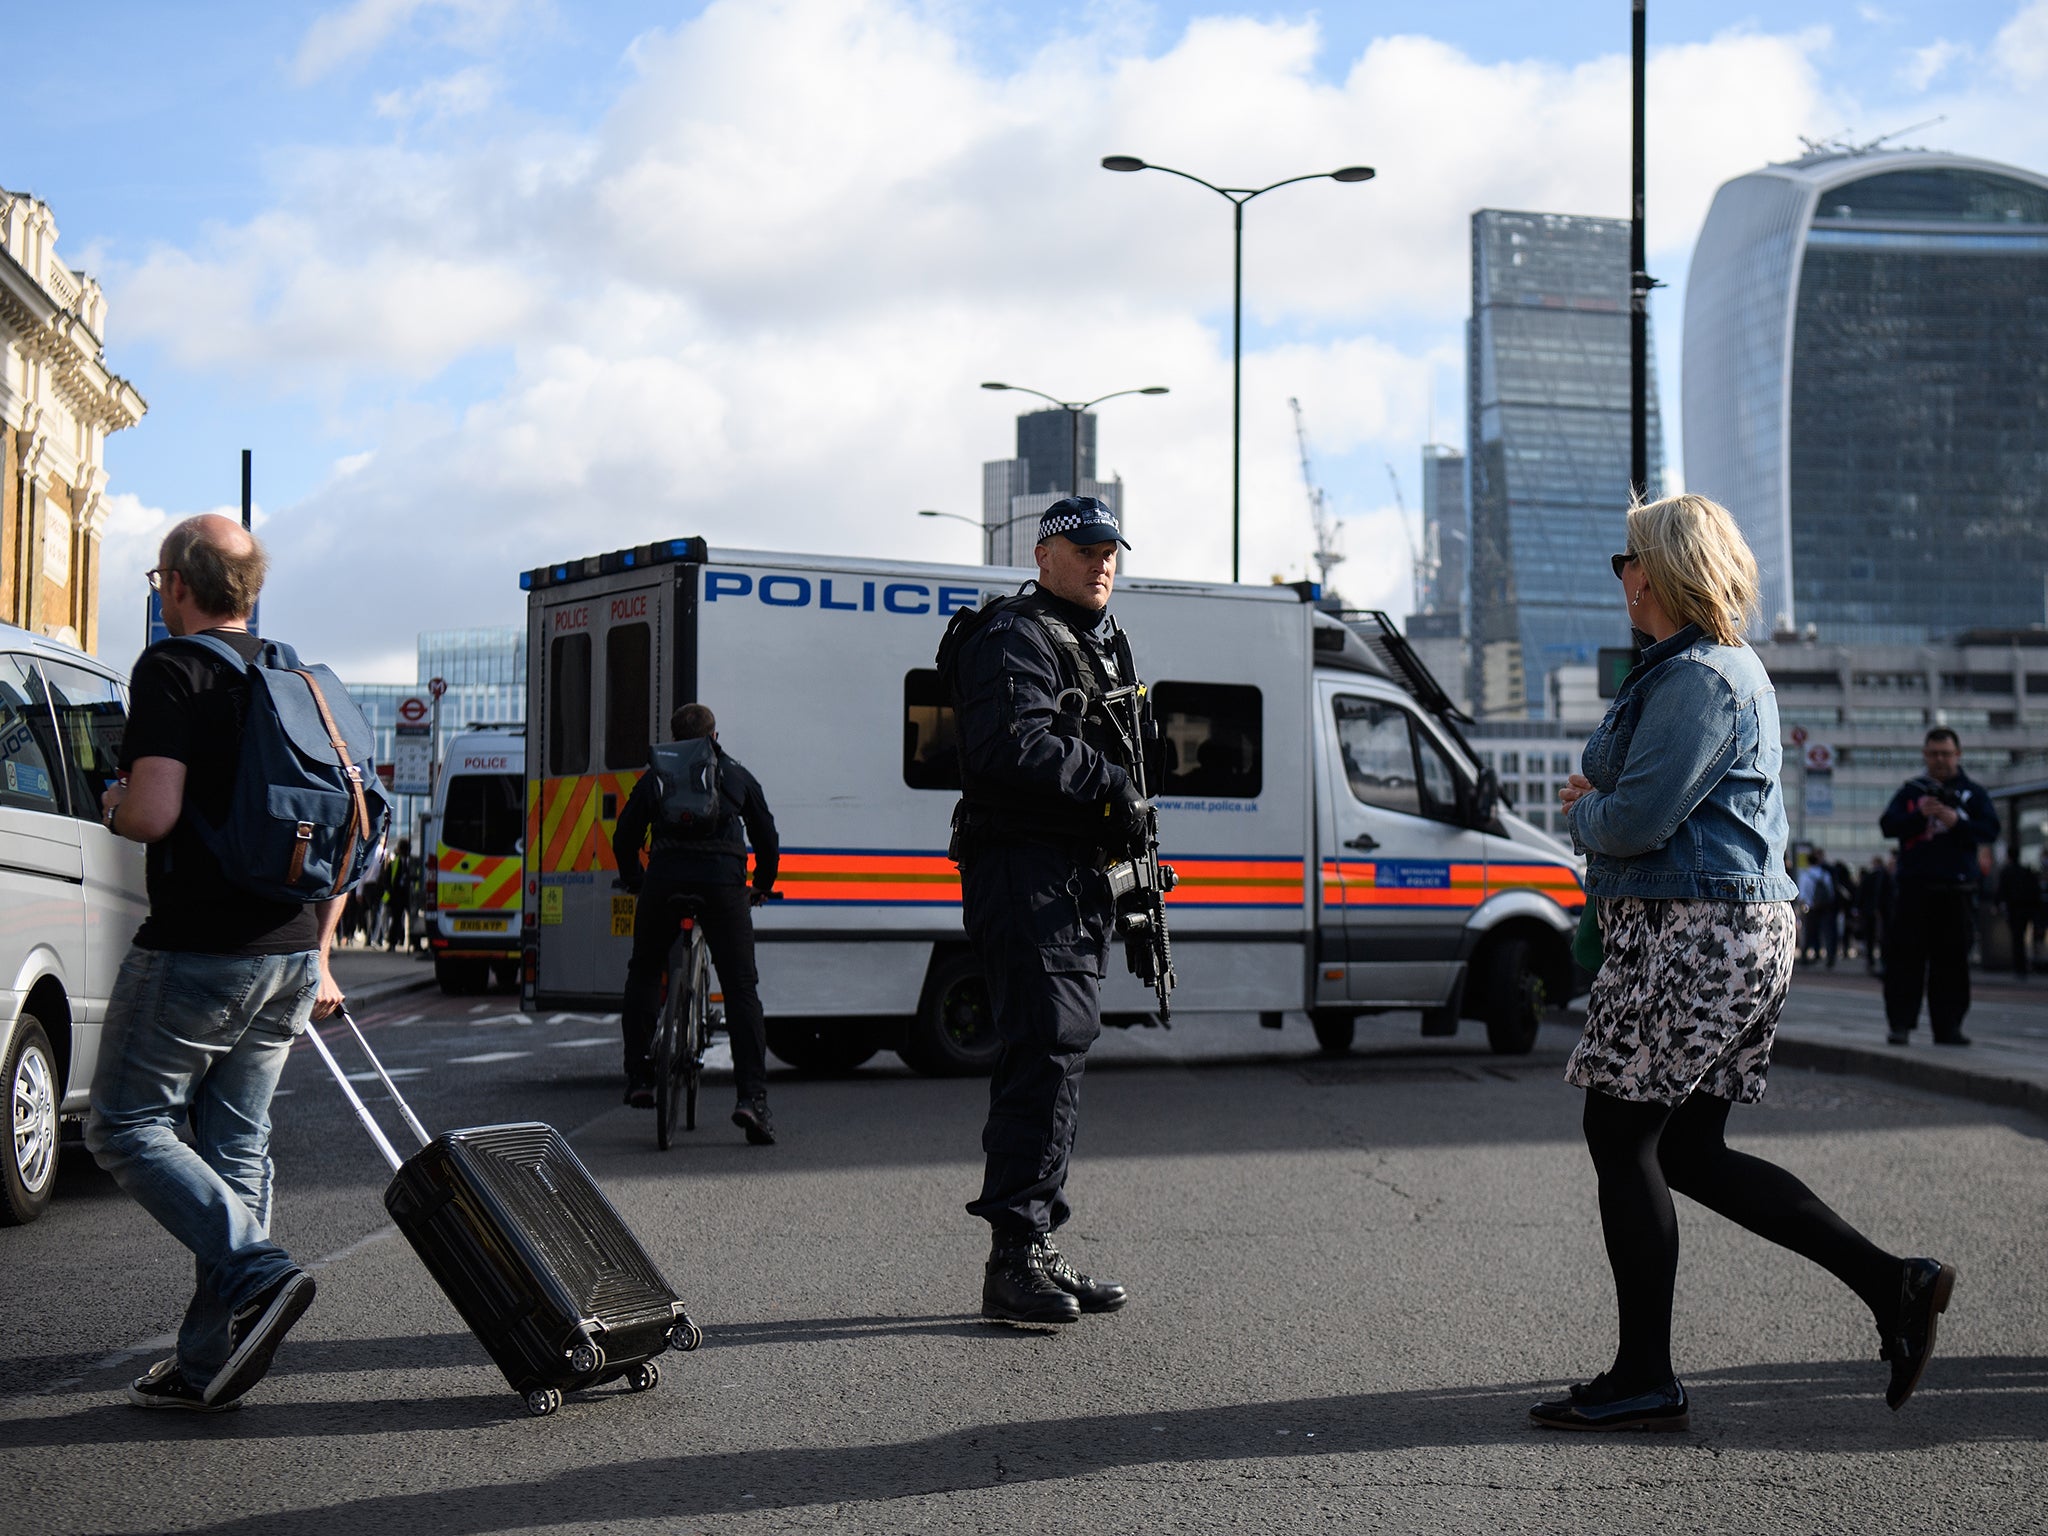 Police at London Bridge following the terror attack there in June